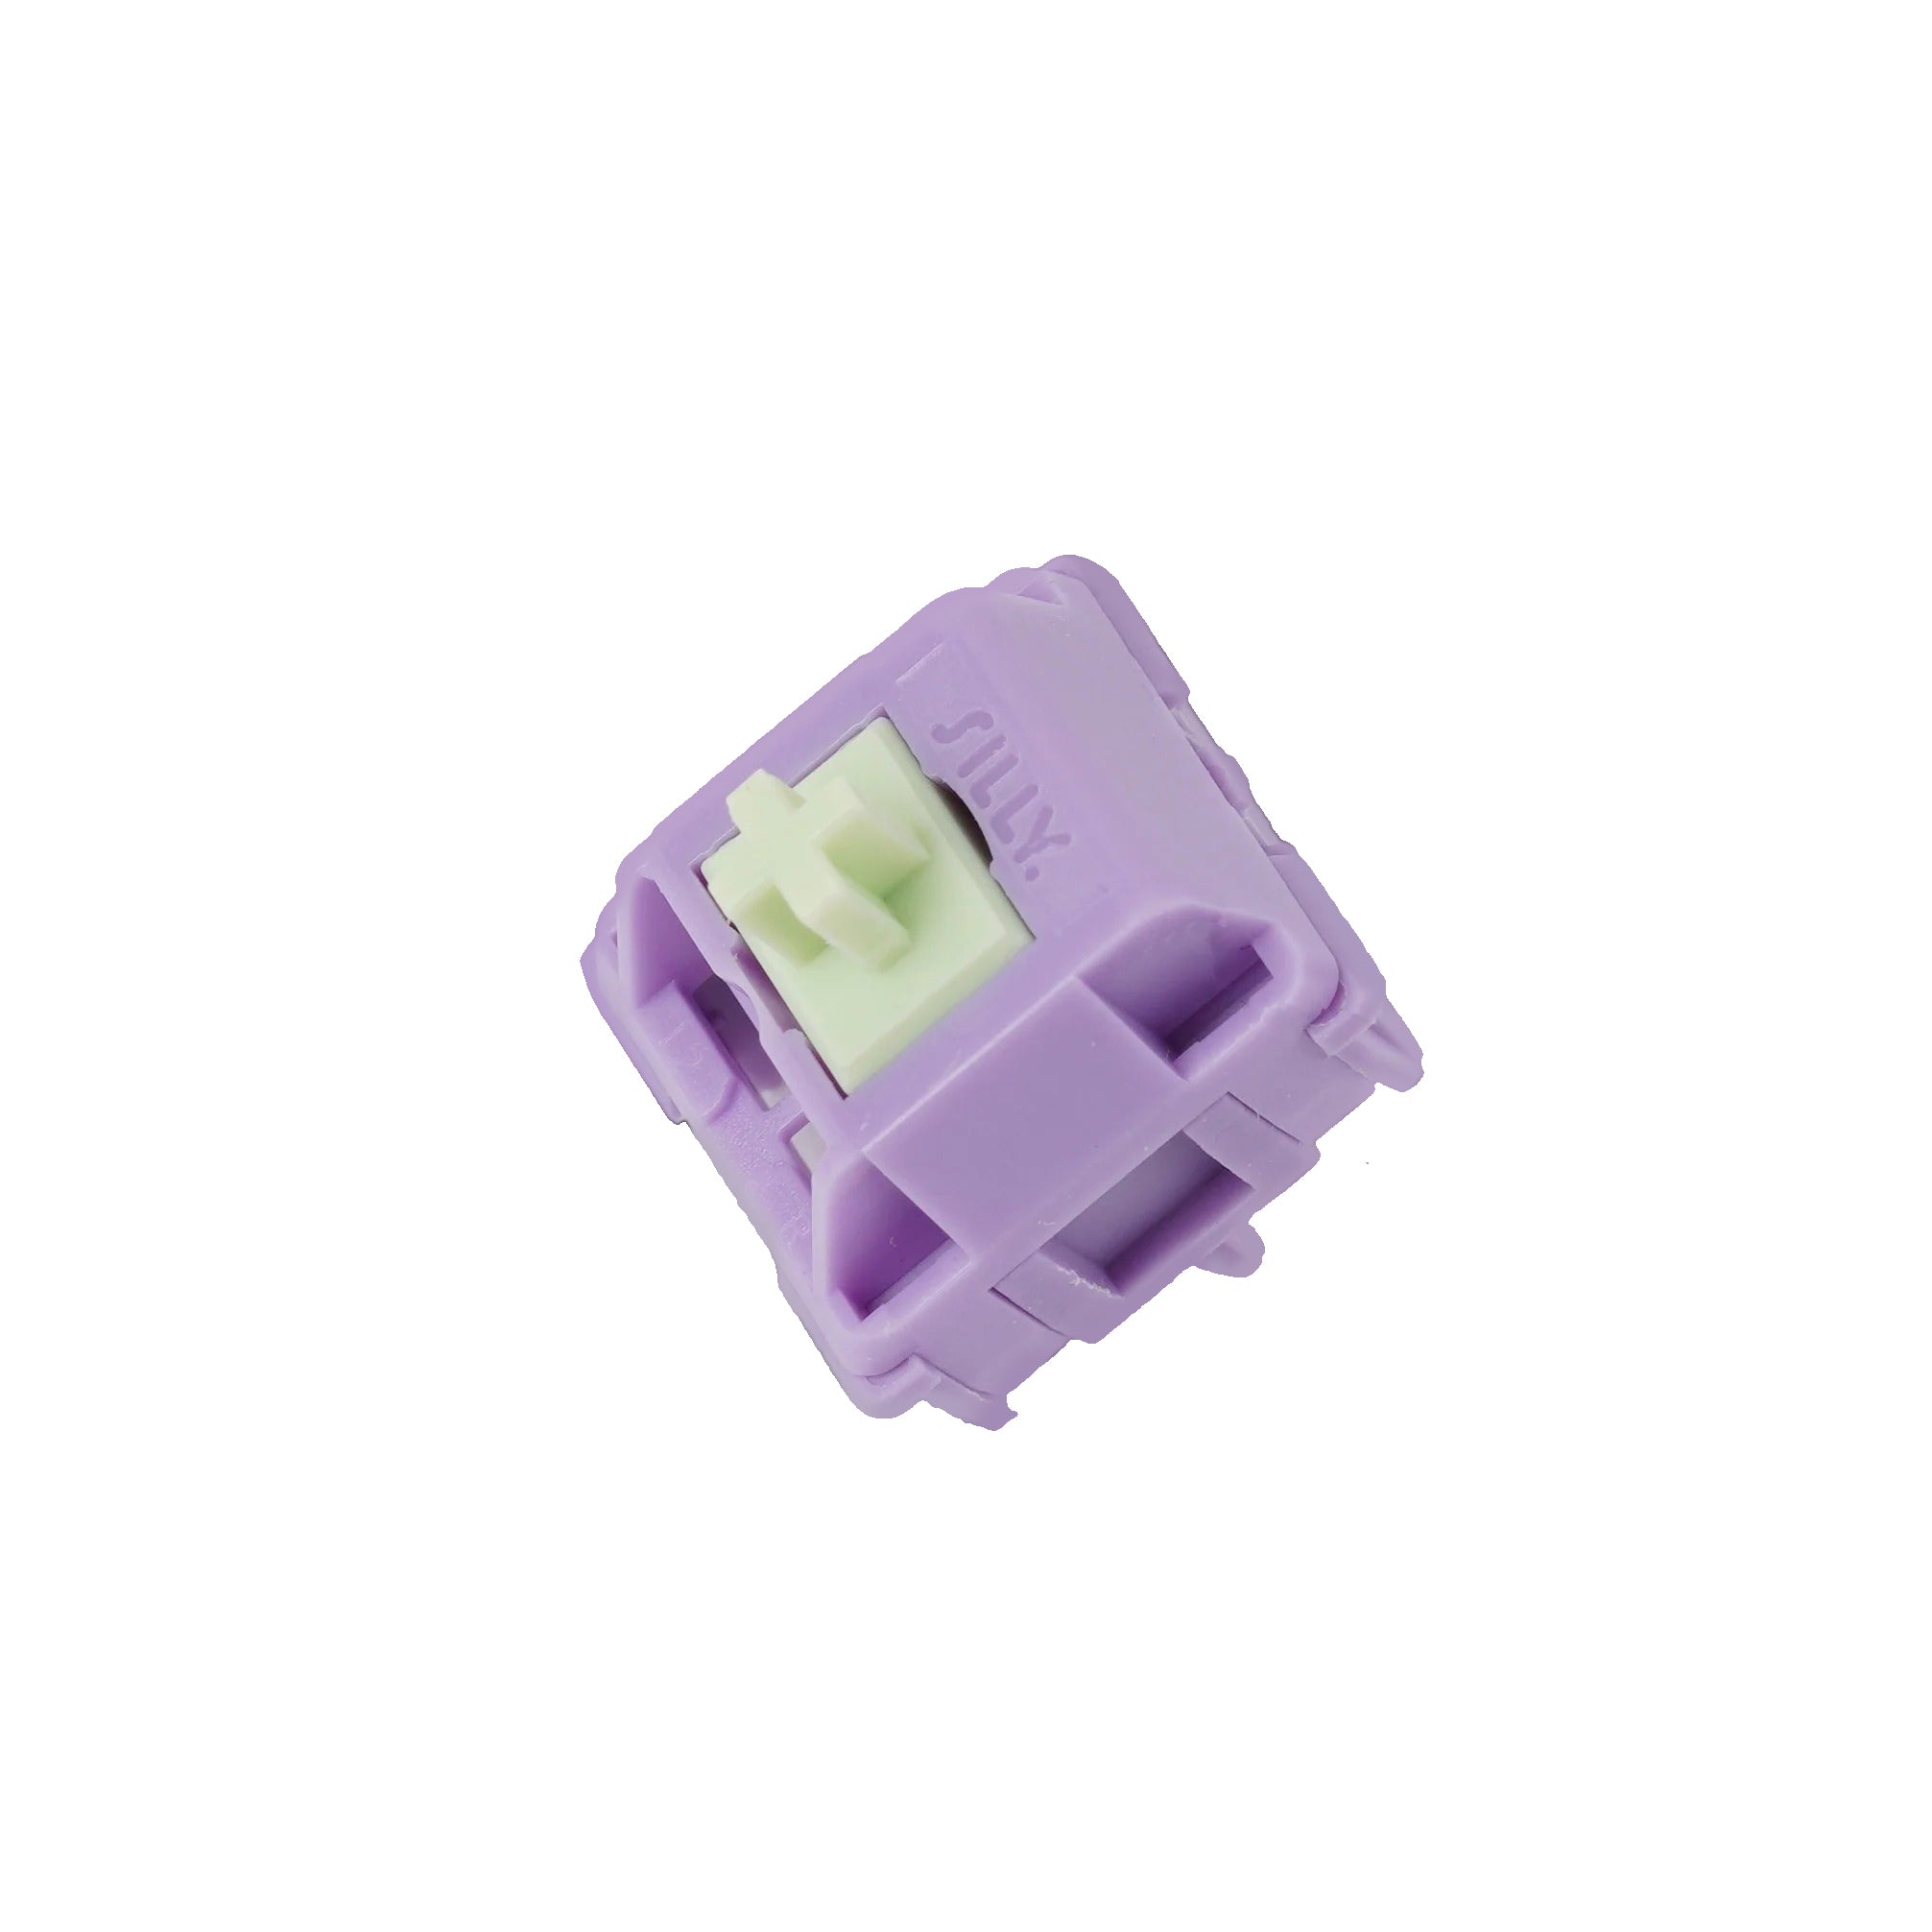 Sillyworks Hyacinth V2 Linear Switches - KeebsForAll